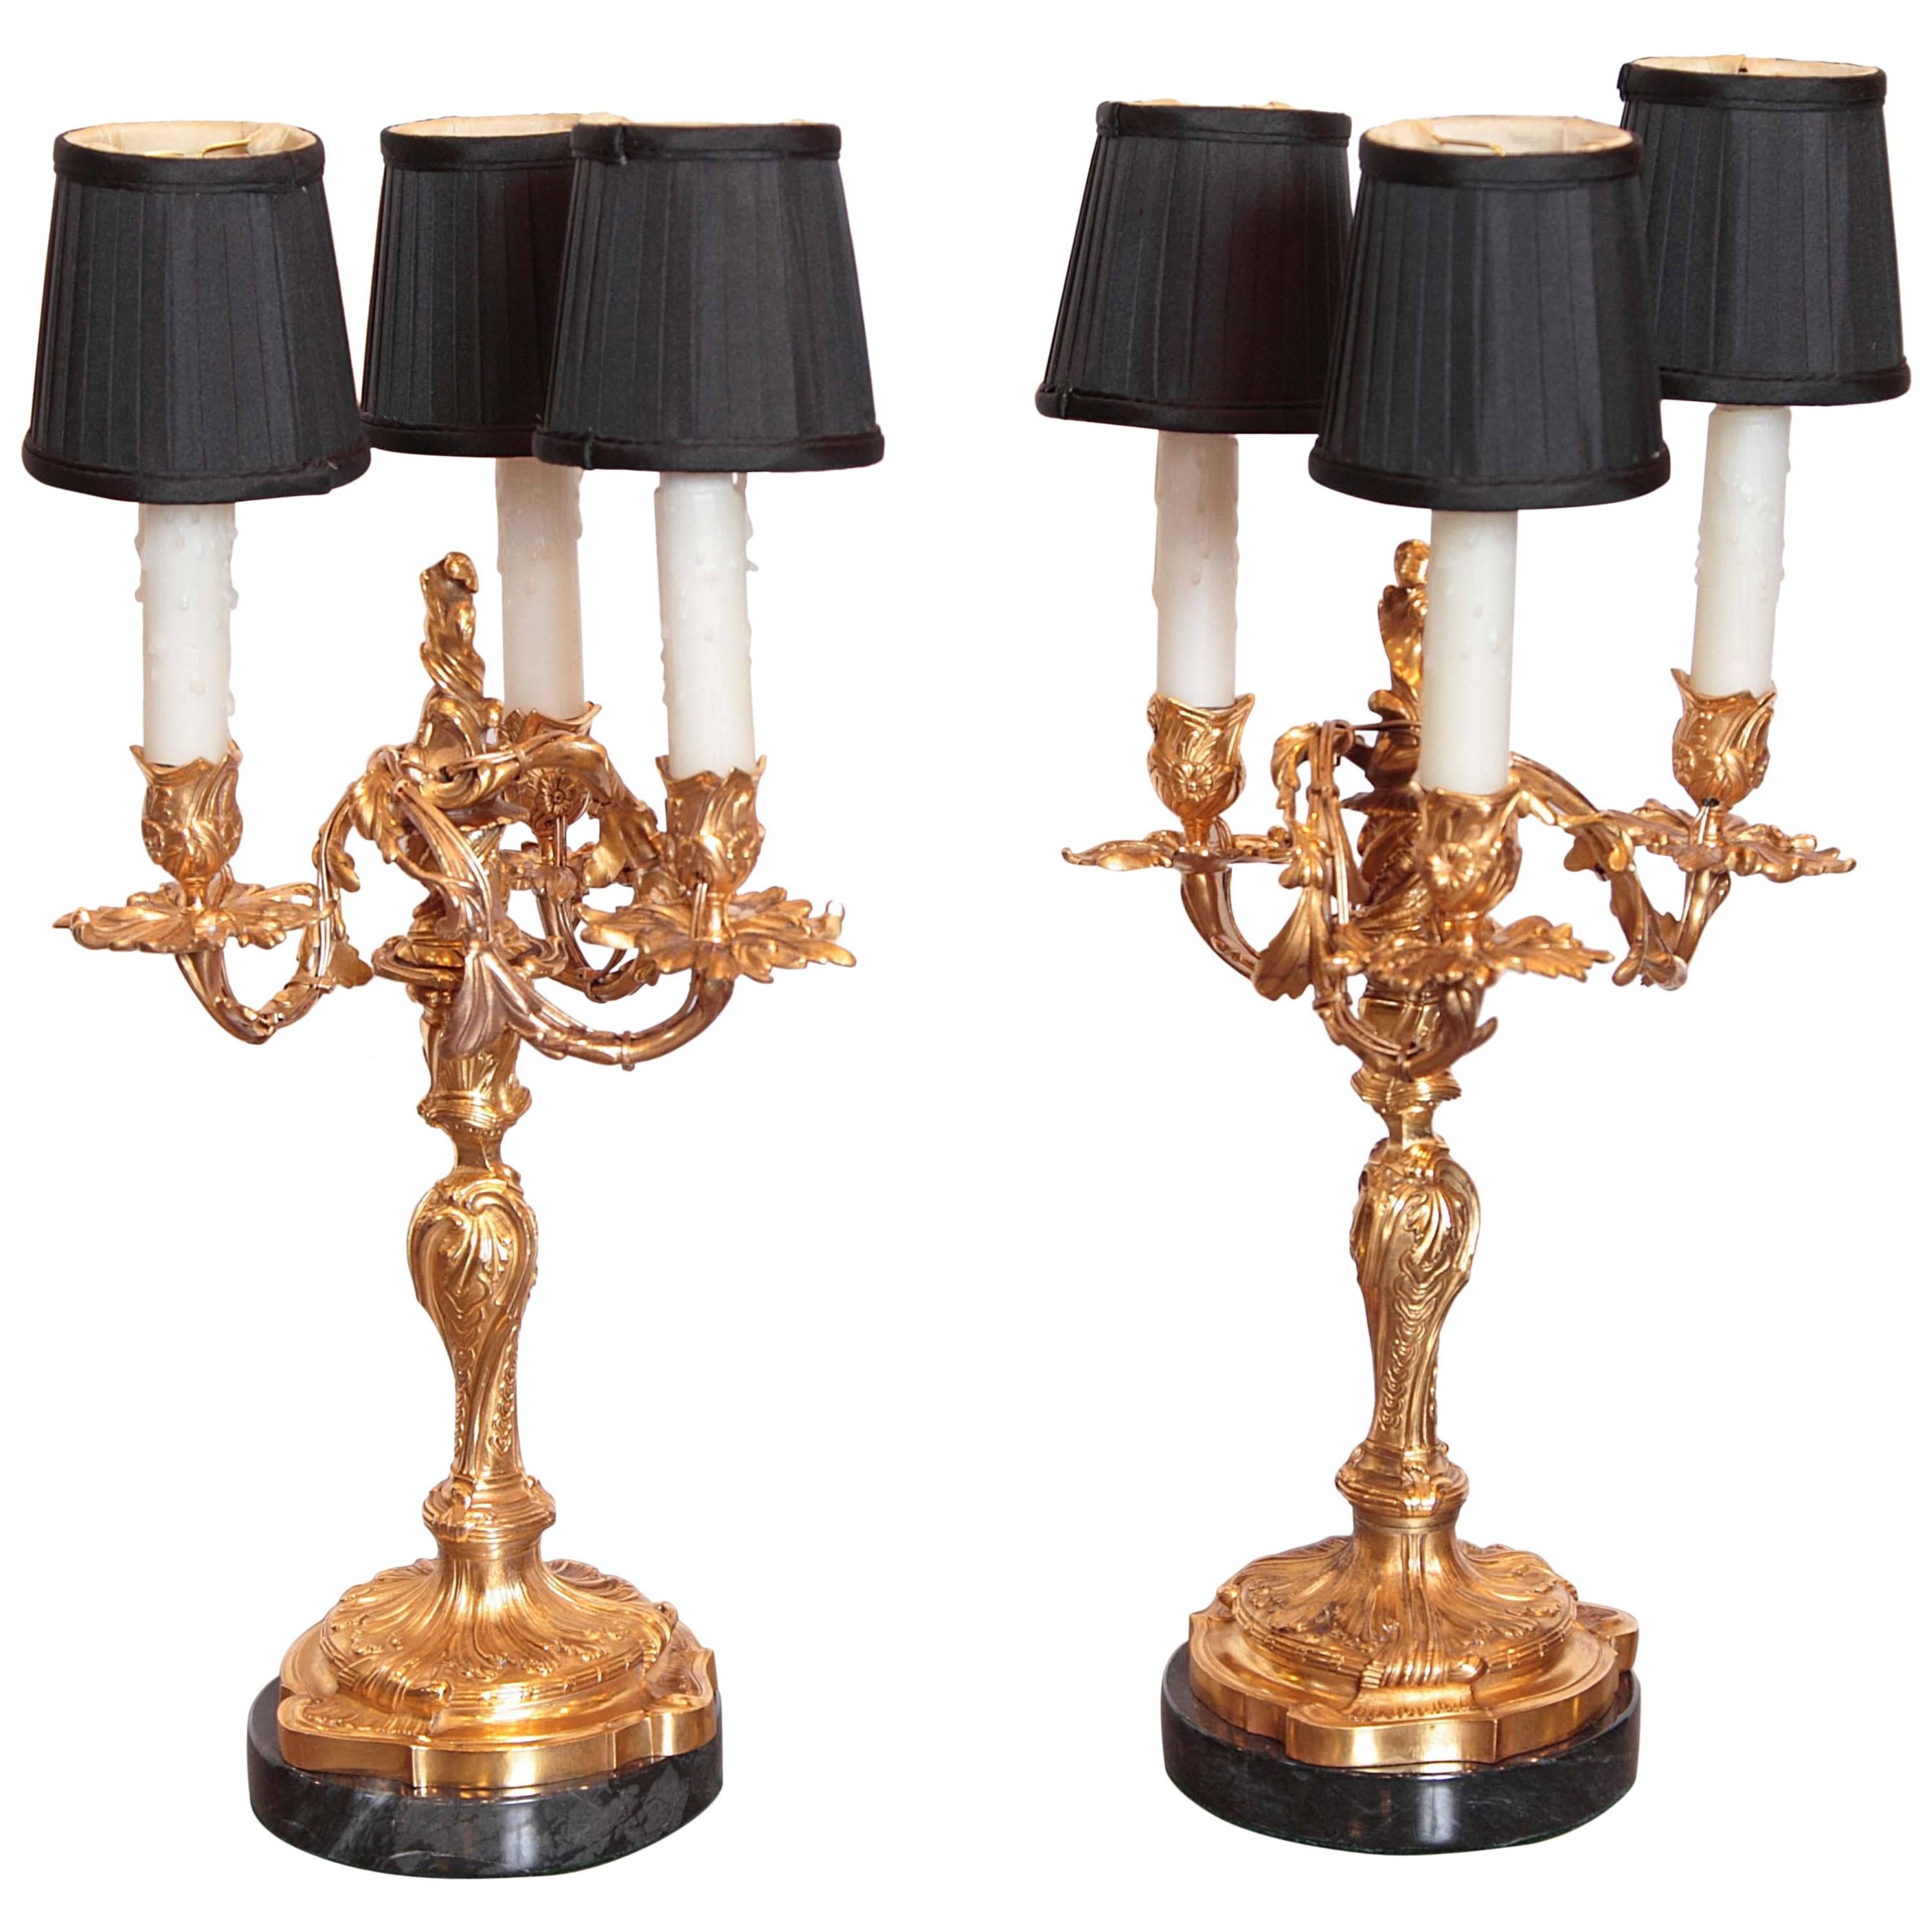 Pair of 19th Century Gilt Bronze Candelabra Lamps Signed Henry Dasson, 1882